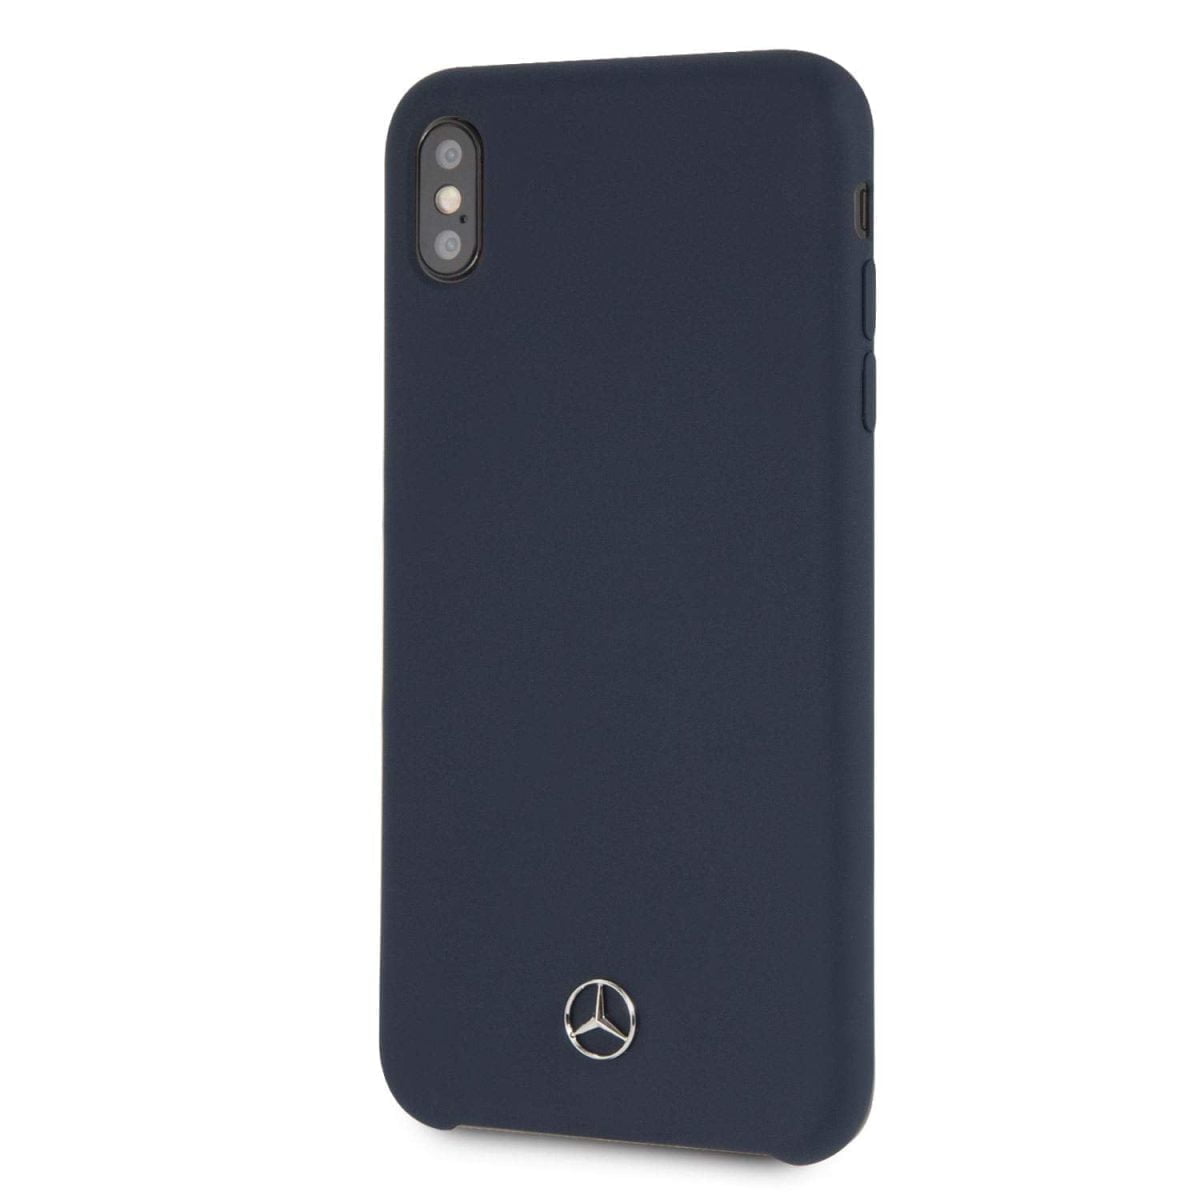 Mercedes Benz Iphone Xs Max Liquid Silicon Silcon Case With Microfiber Lining Navy 02 This Hard Silicone Soft Case With A Sculpted Metallic Mercedes Benz Logo For A 3D Effect Gives You A Classic And Elegant Appeal To Your Handheld Device It Has Easy Accessibility For All Ports And Buttons. Case Compatible With Wireless Chargers. Soft Microfiber Interior, Easy To Hold &Amp; Easy Snap-On Design Makes It Fast And Easy To Install Or Take Off In Seconds This Case Provides Both The Ultimate Luxury Experience And Protection From Scratches And Abrasions By Slightly Raised Edges Iphone Case Iphone Xs Liquid Silicon Case With Microfiber Lining (Navy Blue) Mercedes-Benz